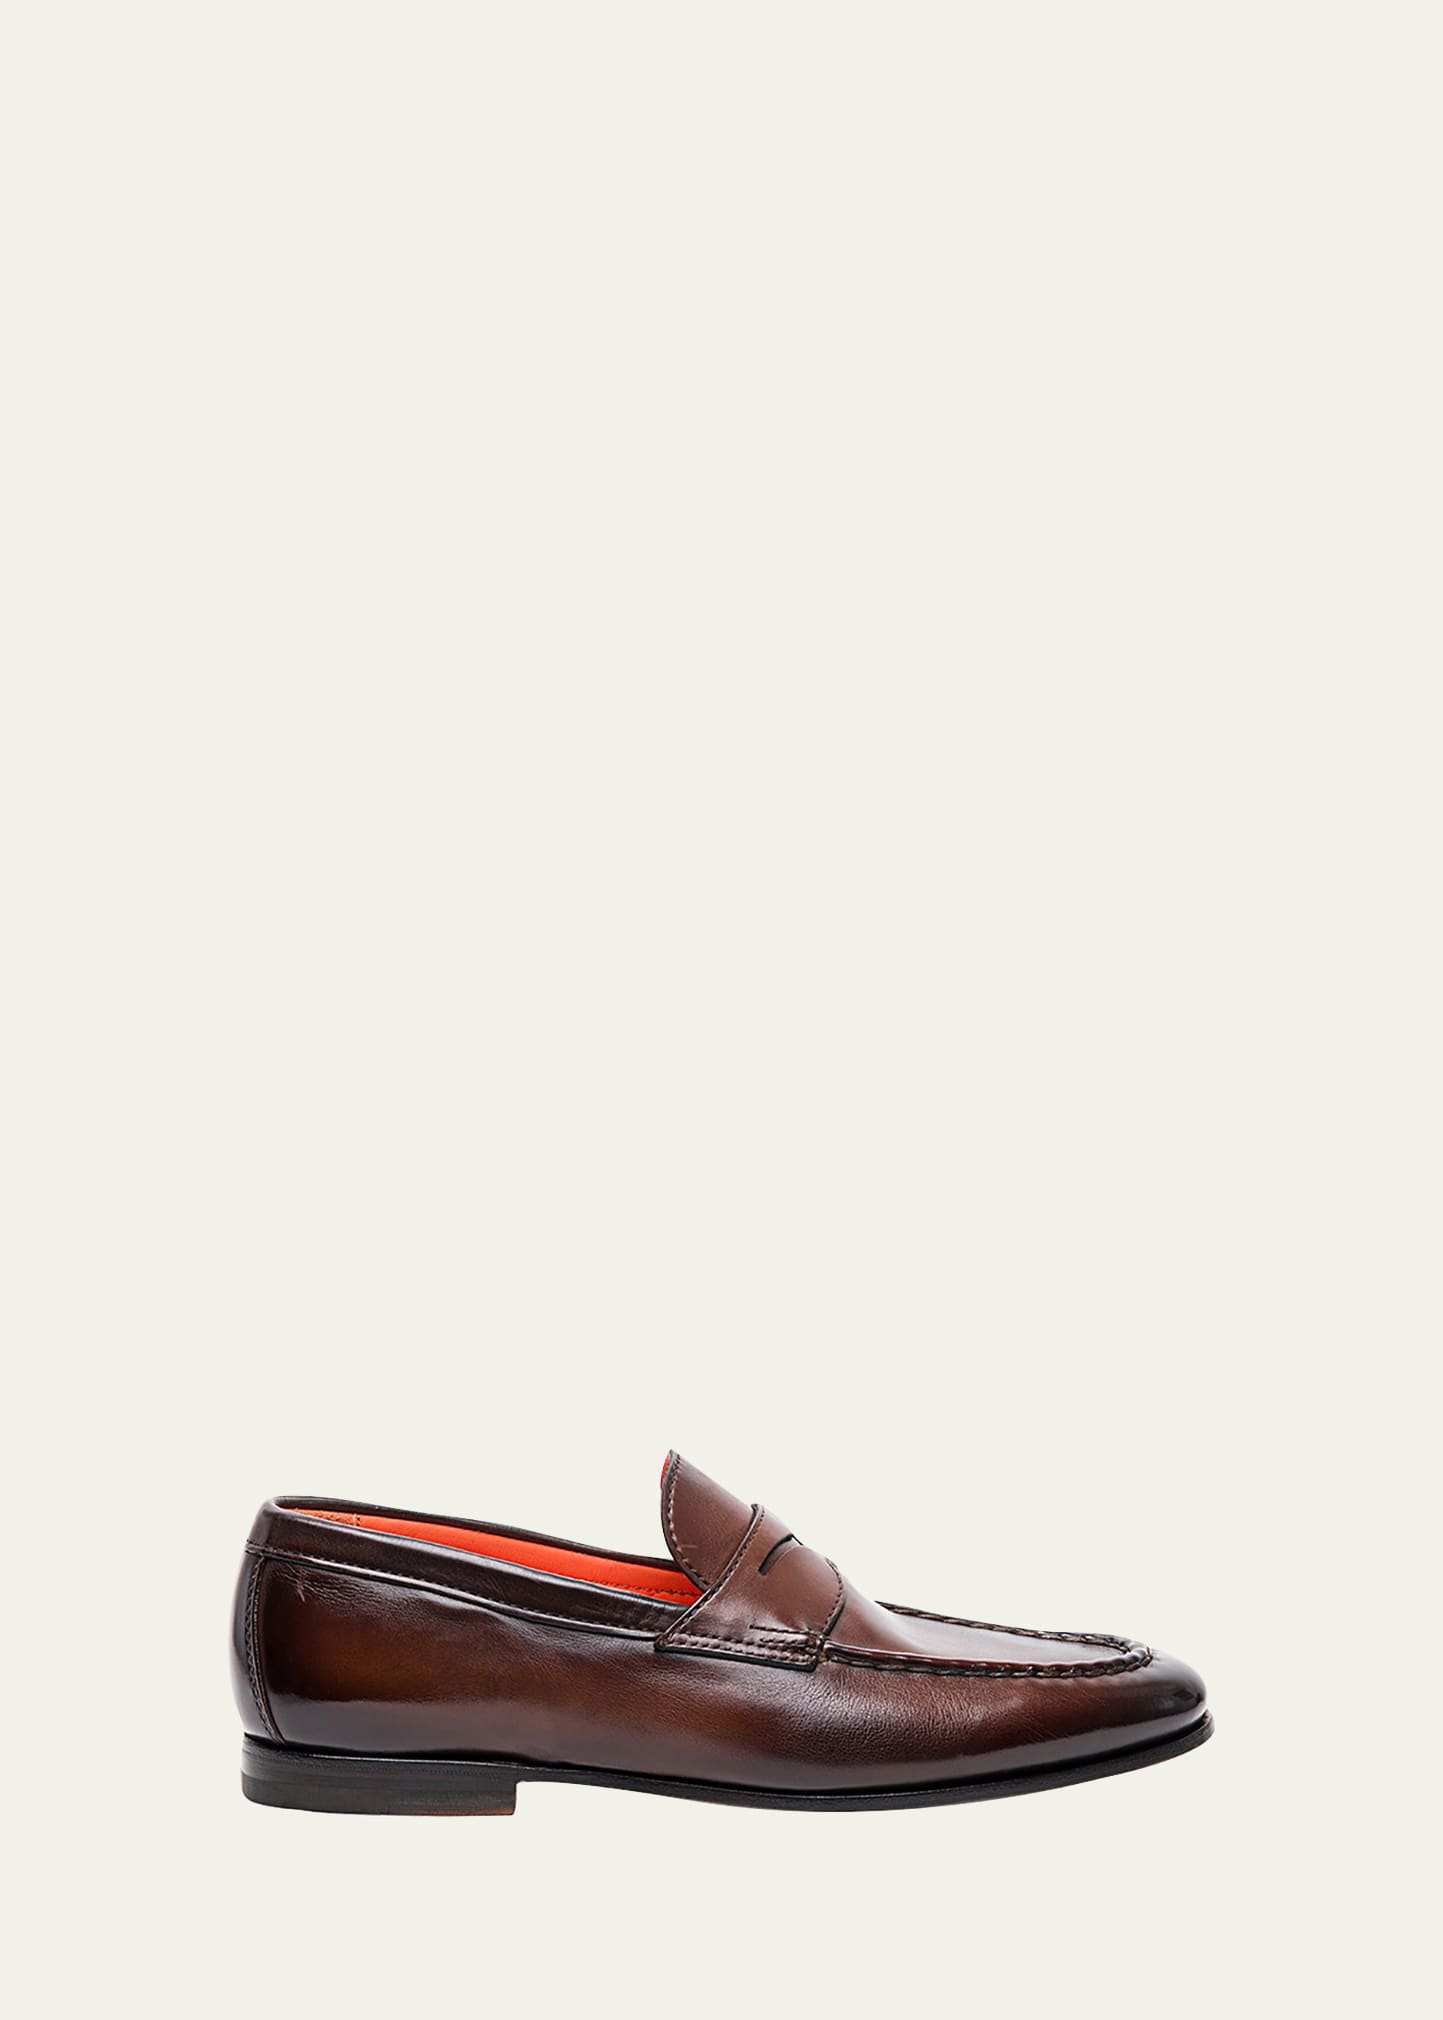 Men's Door Burnished Leather Penny Loafers